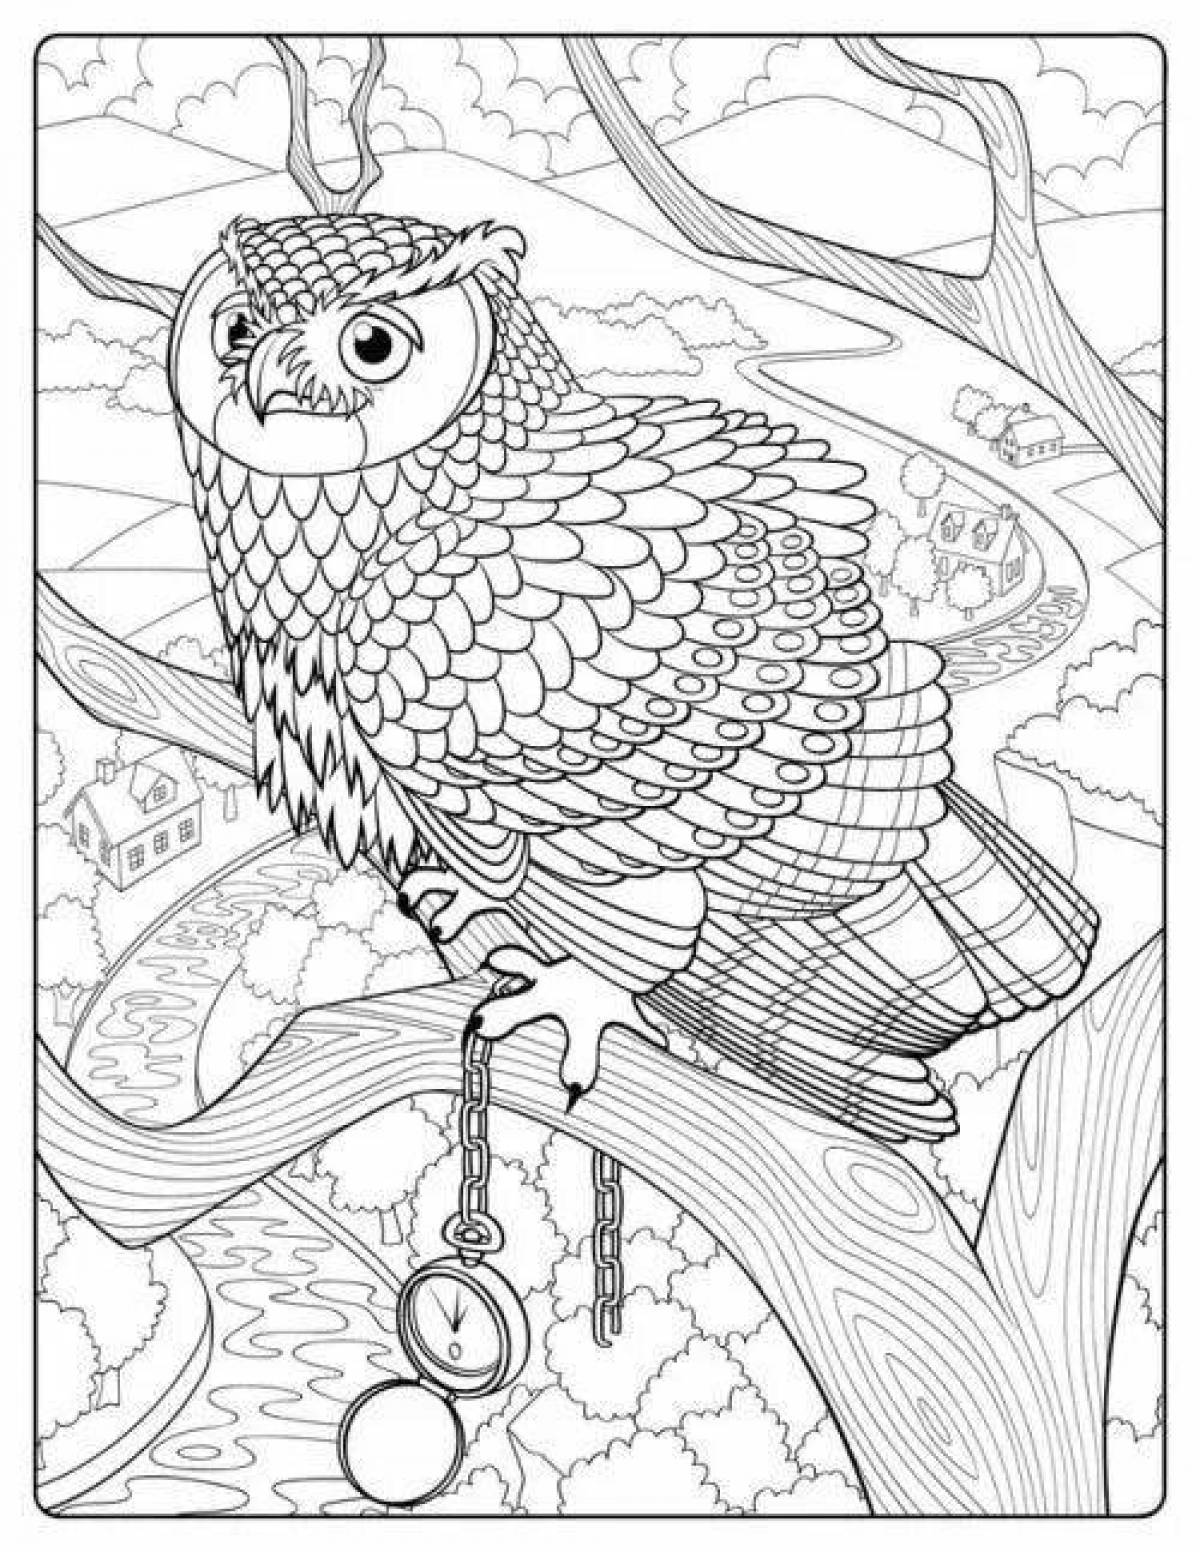 Owl by numbers #8